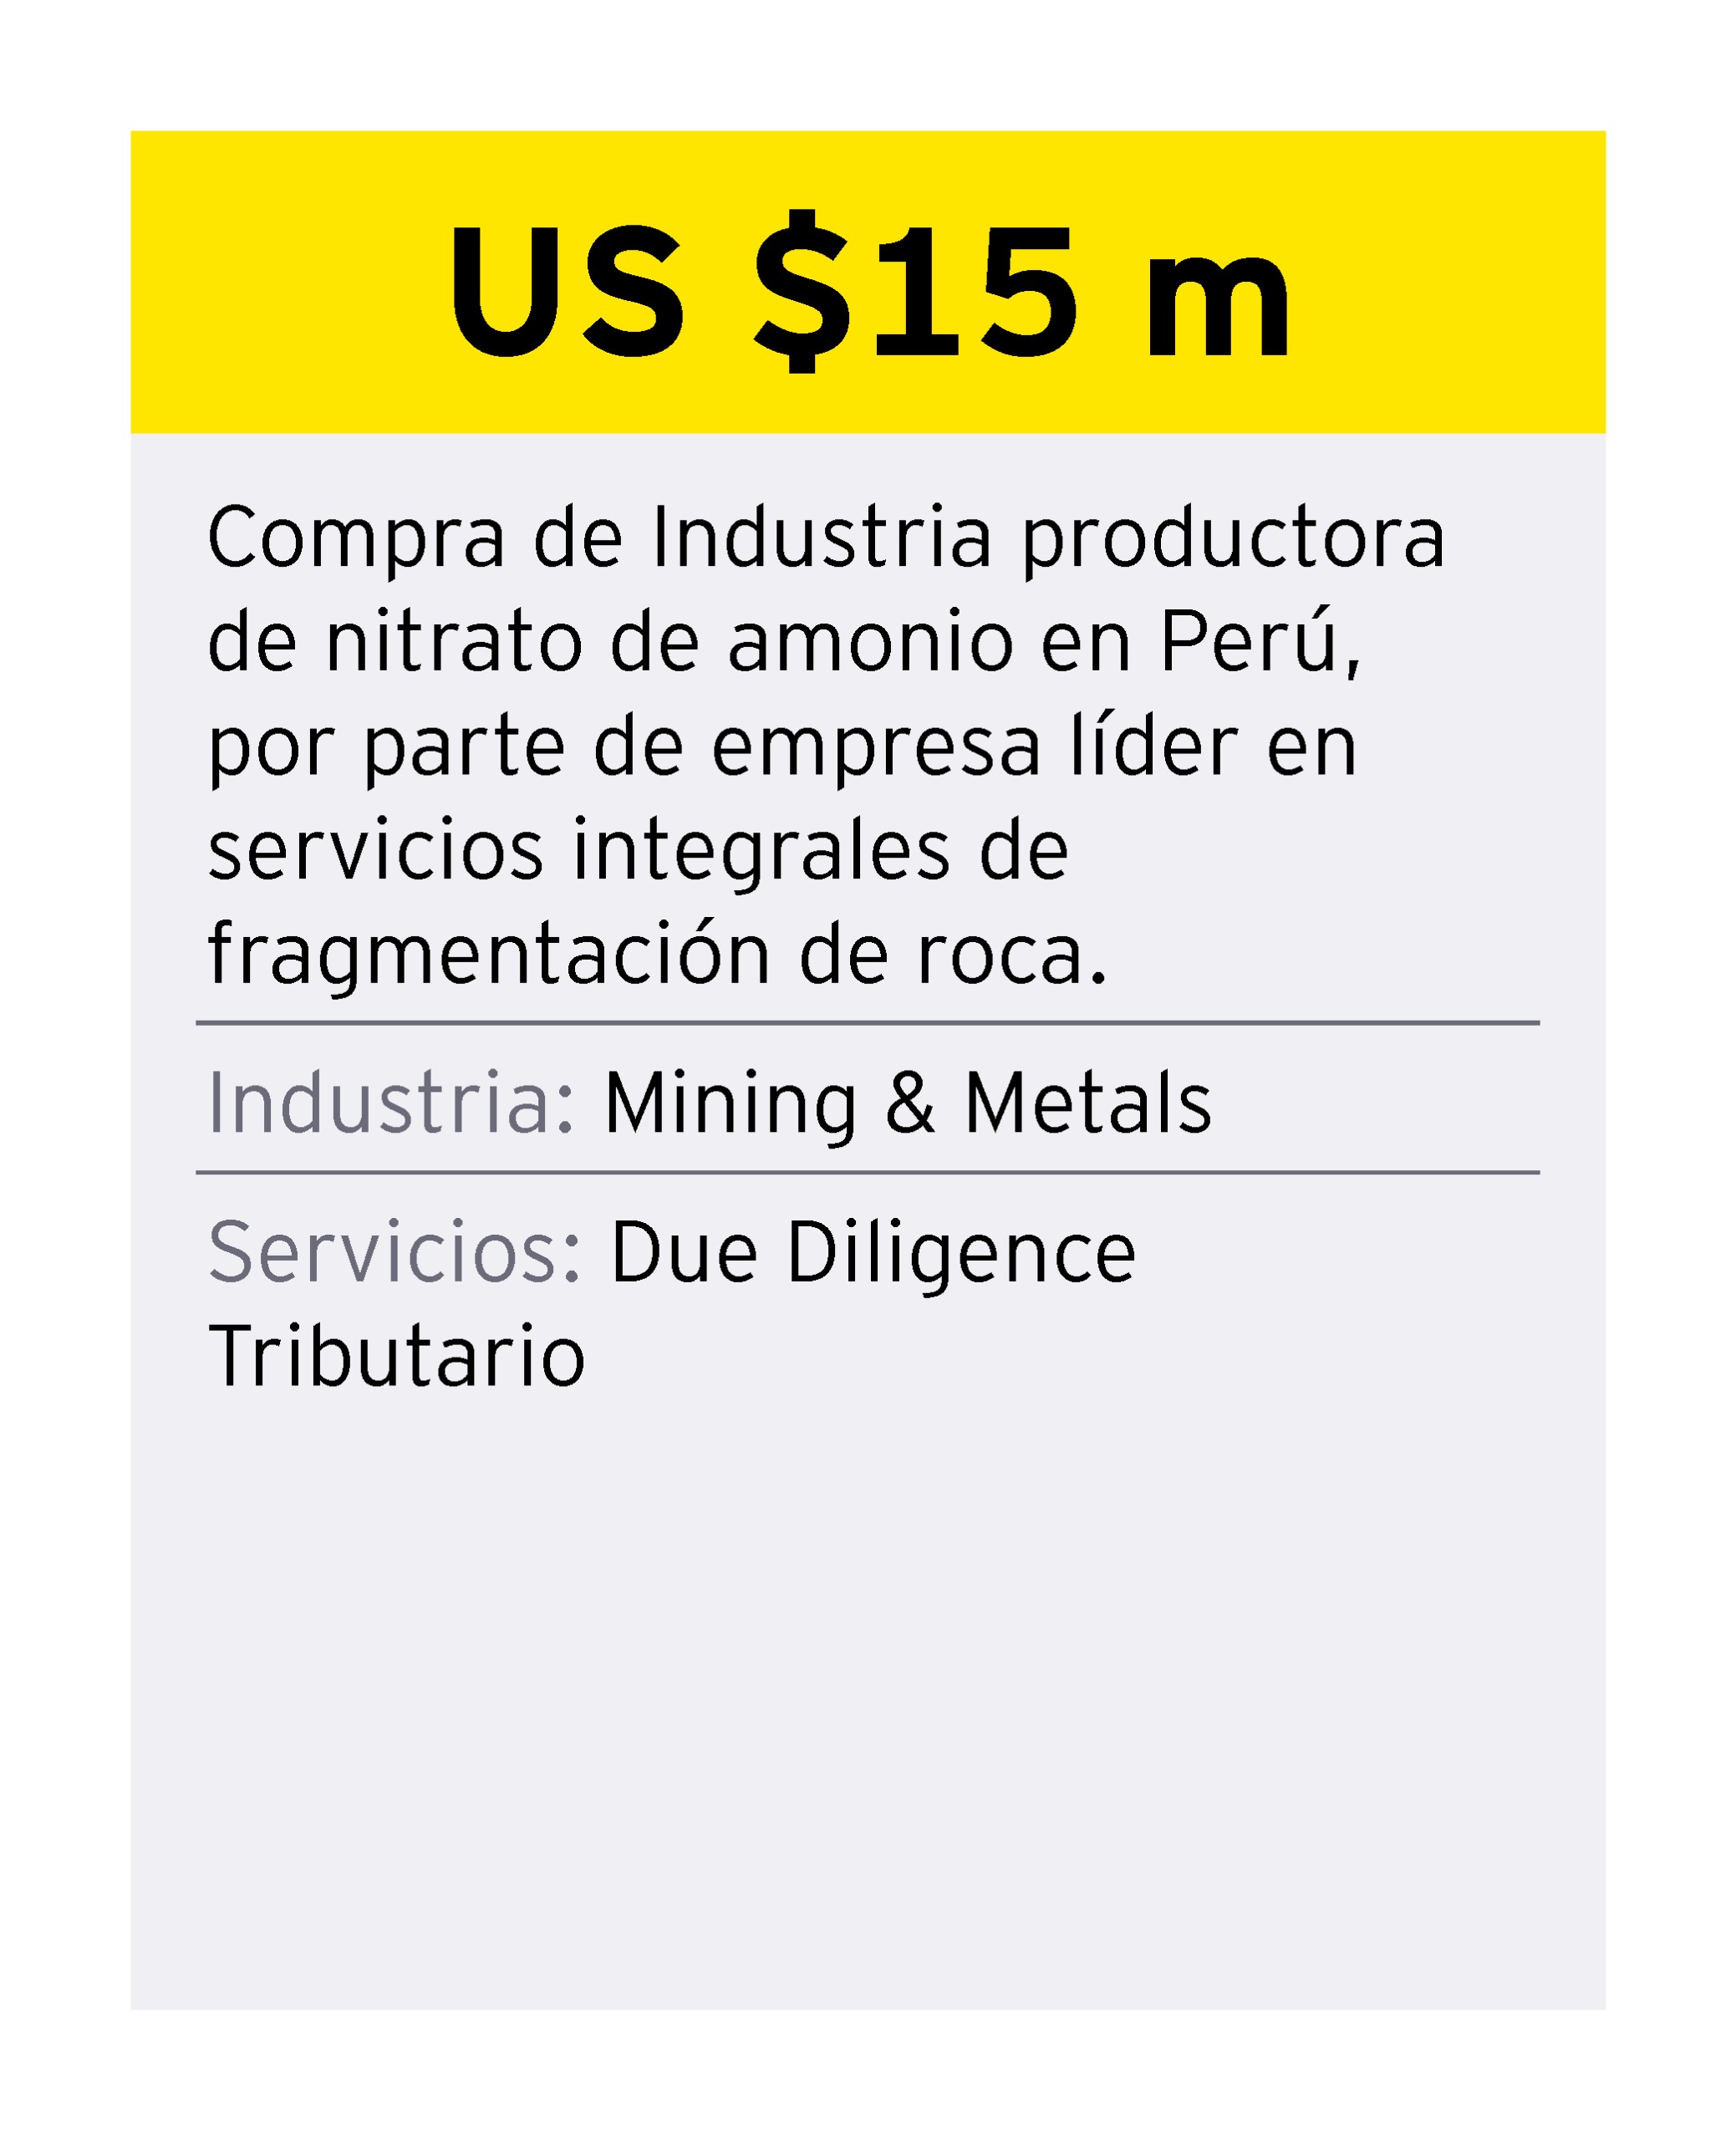 ey-chile-credencial-5-mining-and-metals